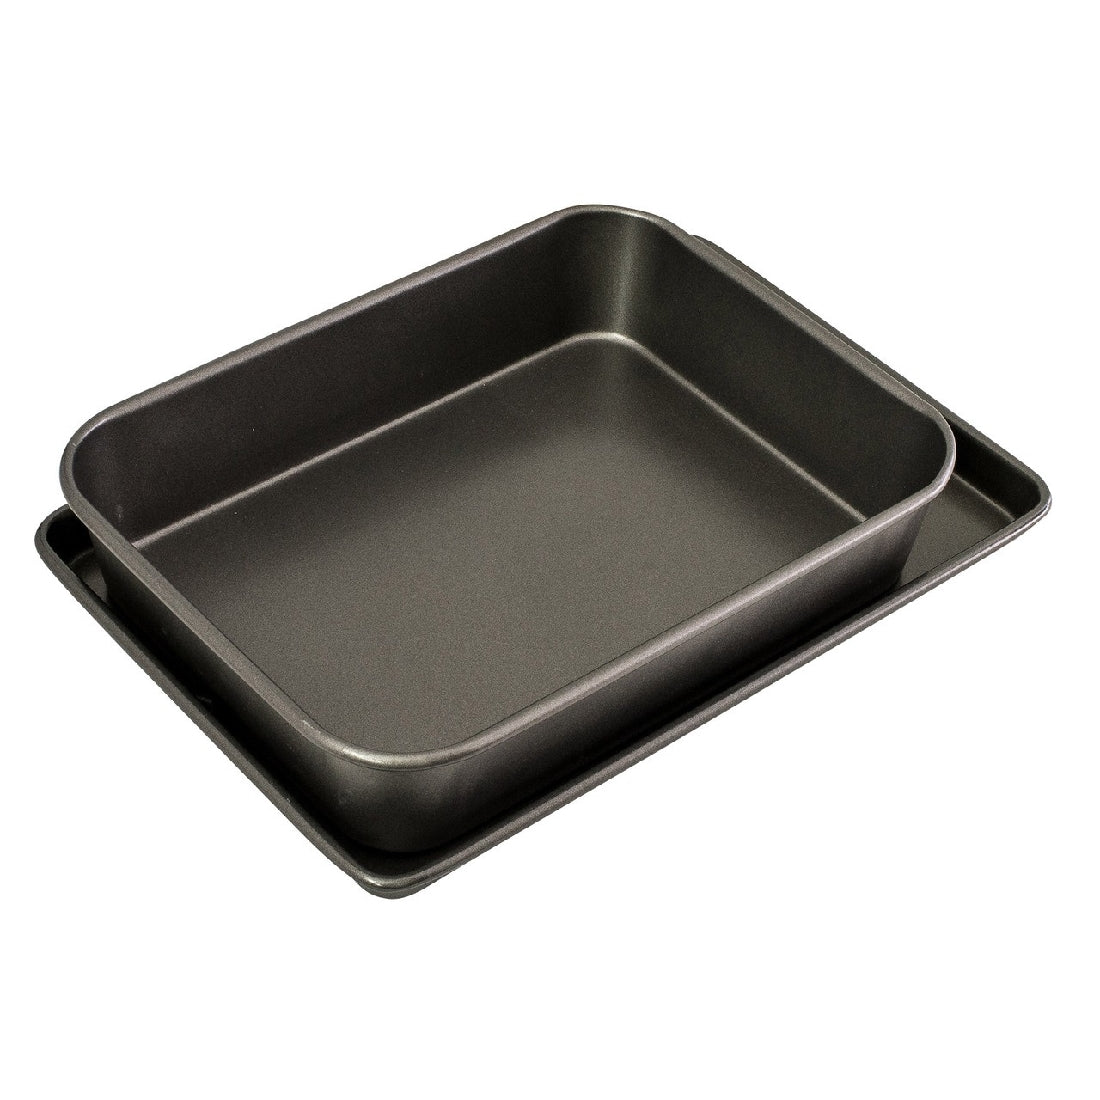 Bakemaster Roasting/oven Tray Twin Pack